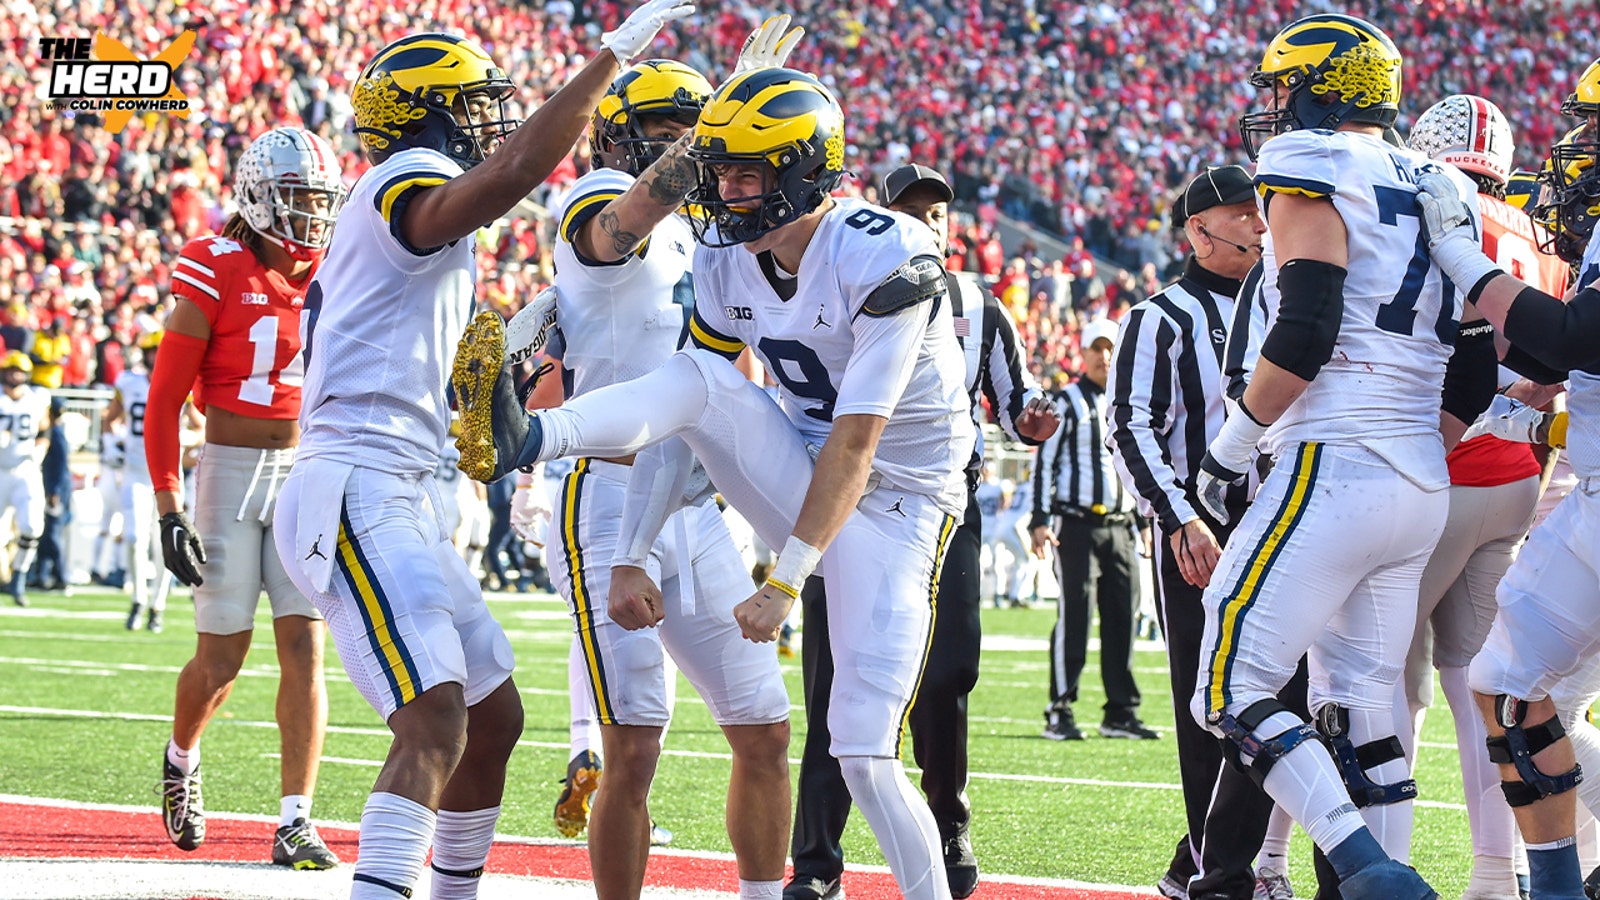 Has Michigan officially passed Ohio State?